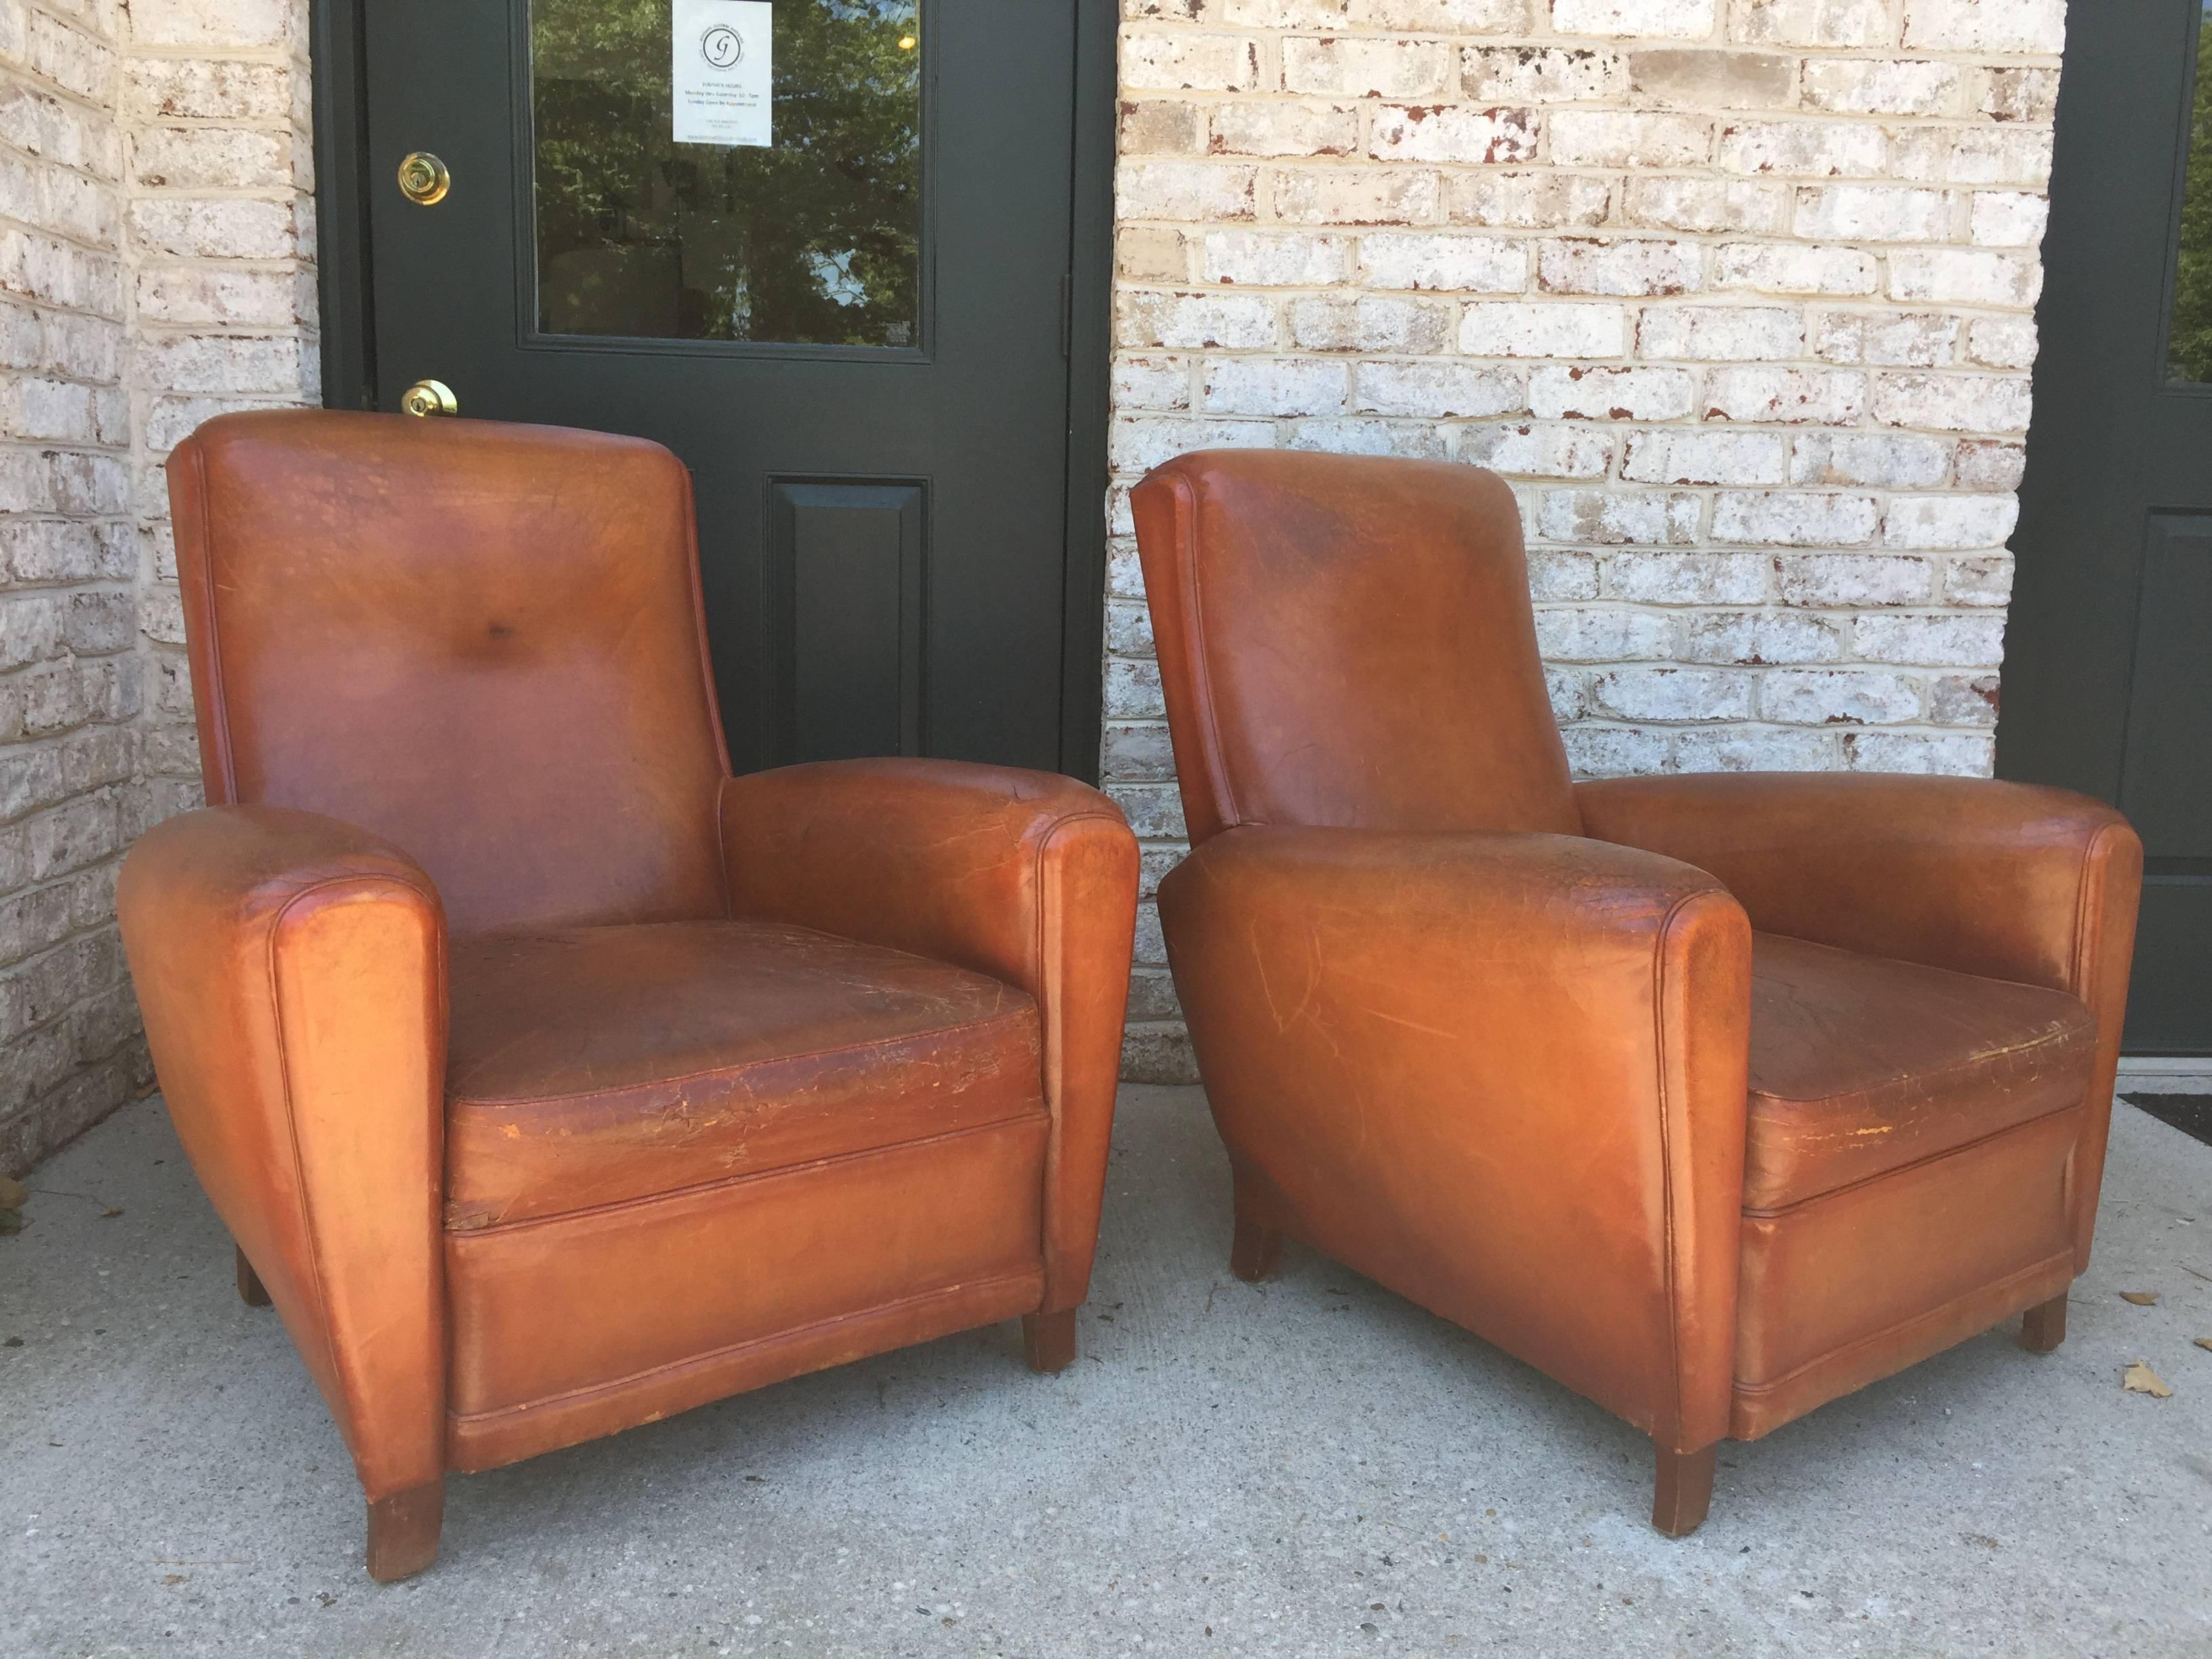 These all original French deco armchairs in beautiful worn and distressed leather. These beauties are extremely comfortable and you sink right in to them.